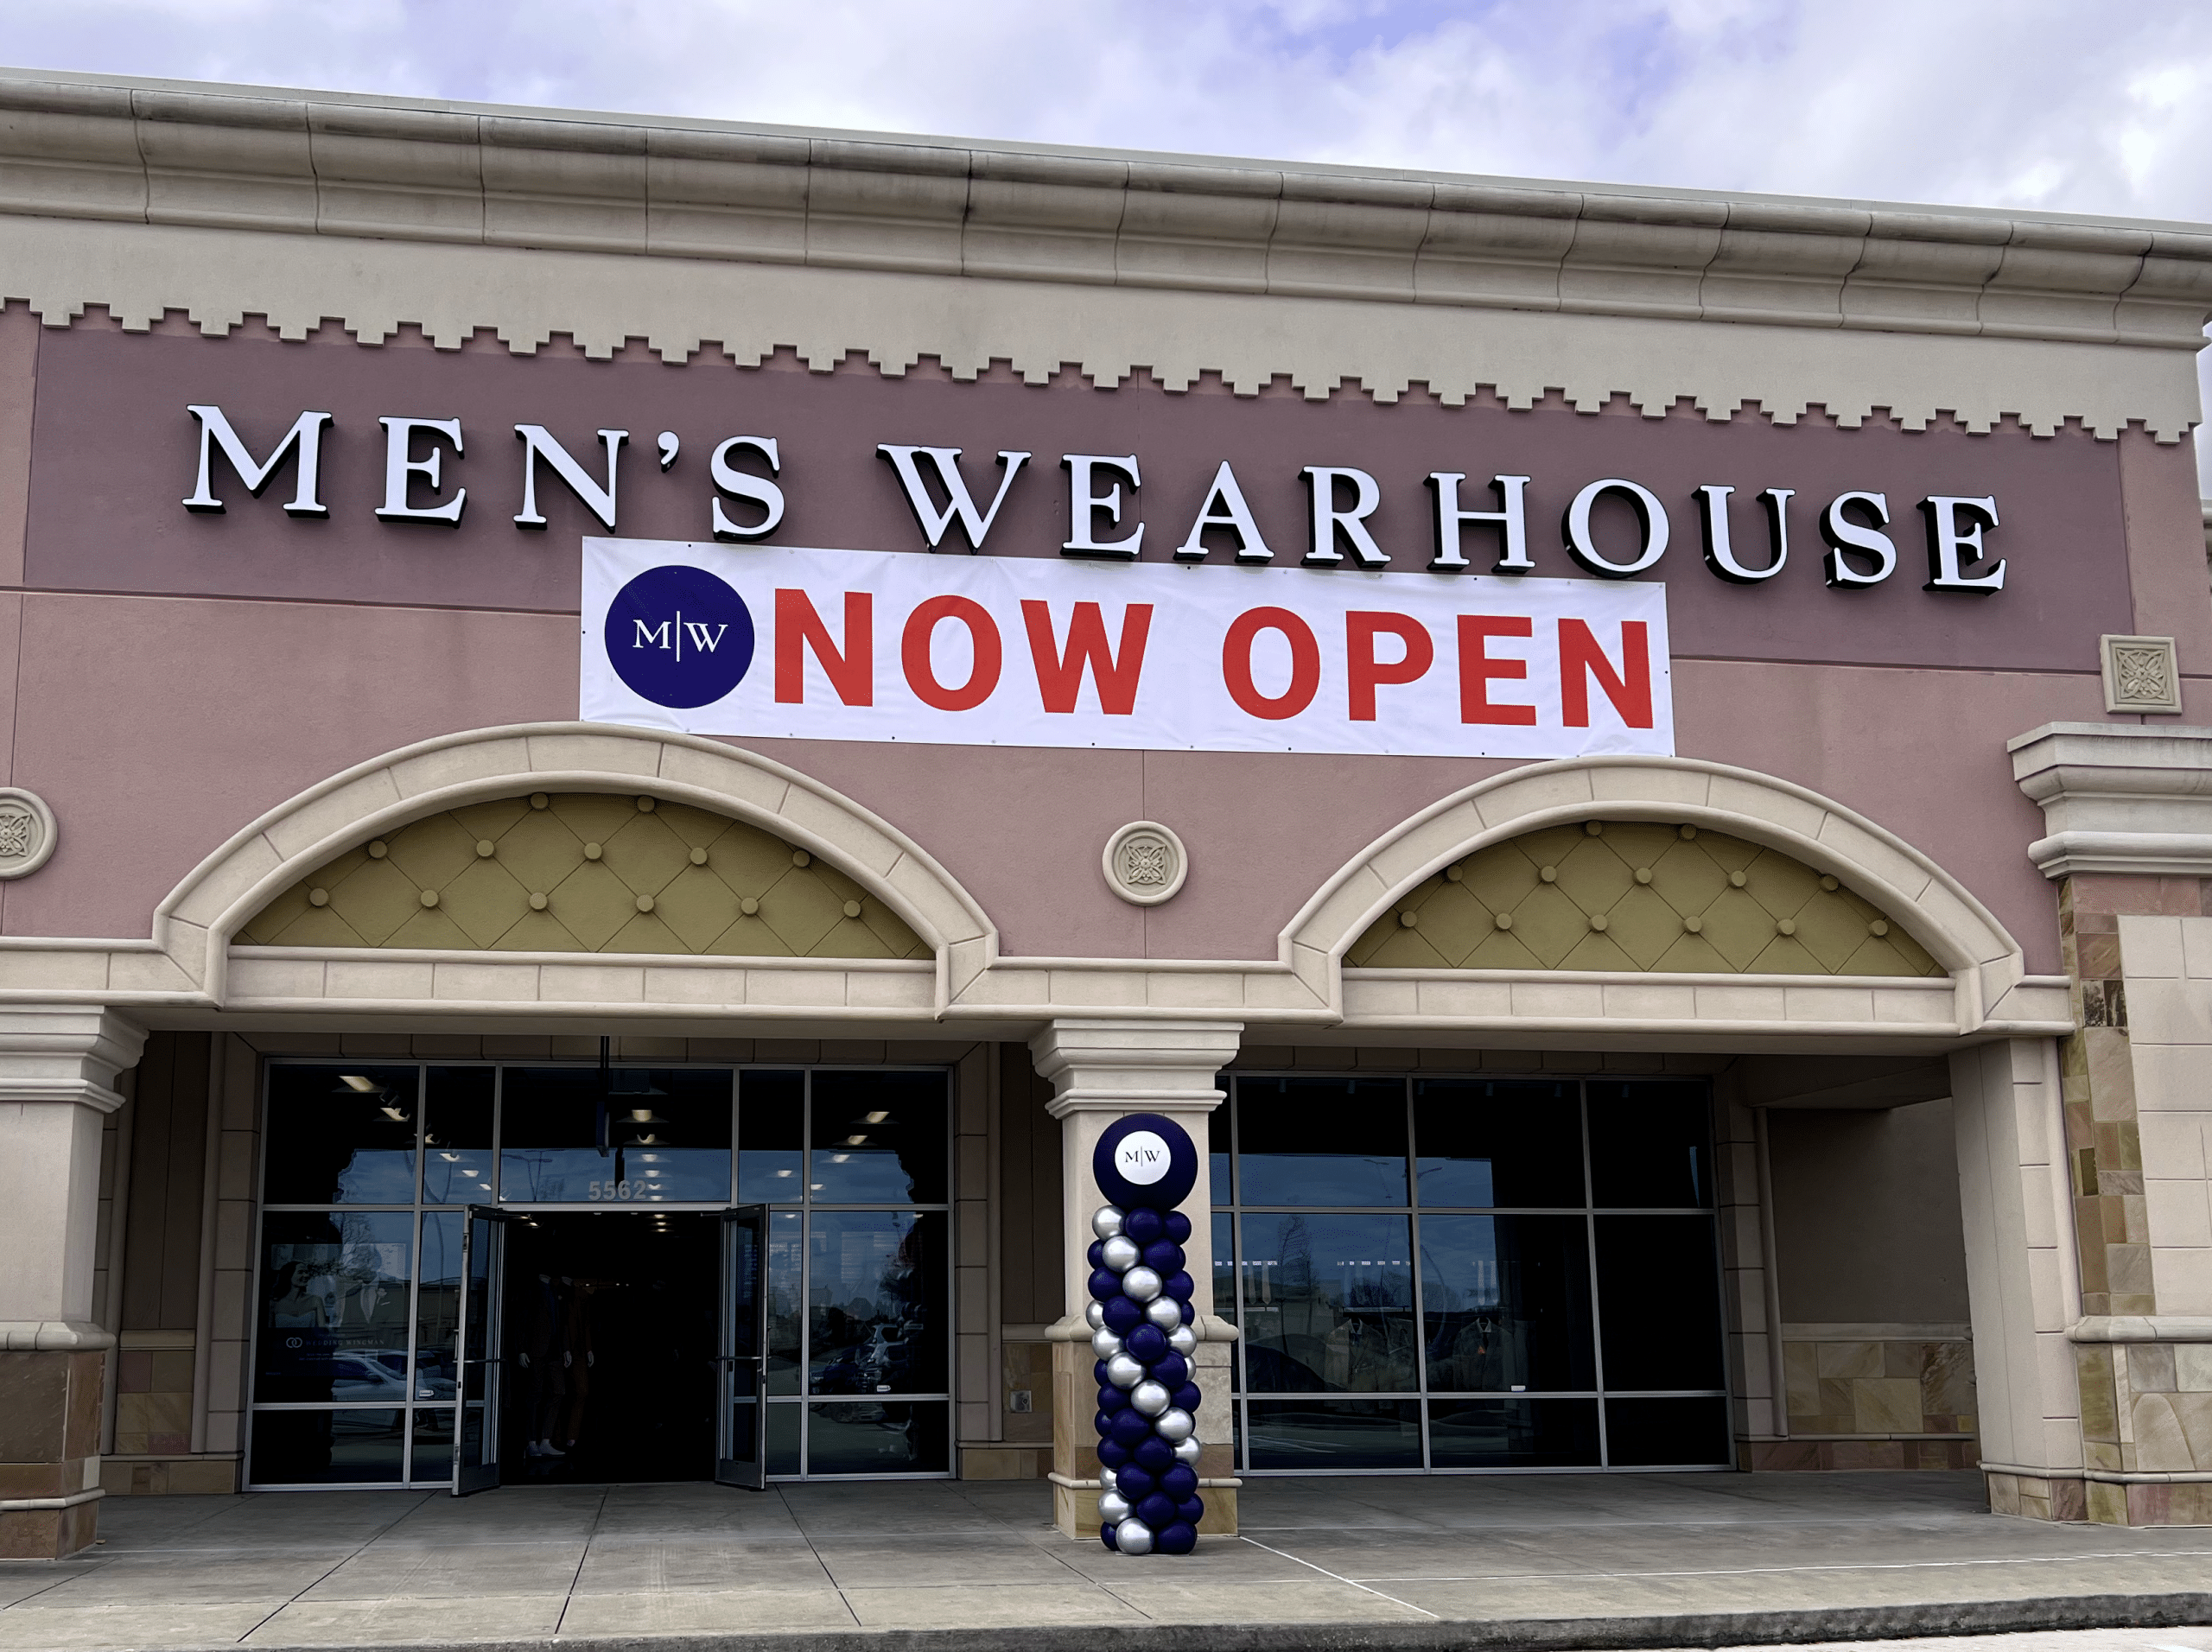 Storefront reading "Men's Wearhouse Now Open"